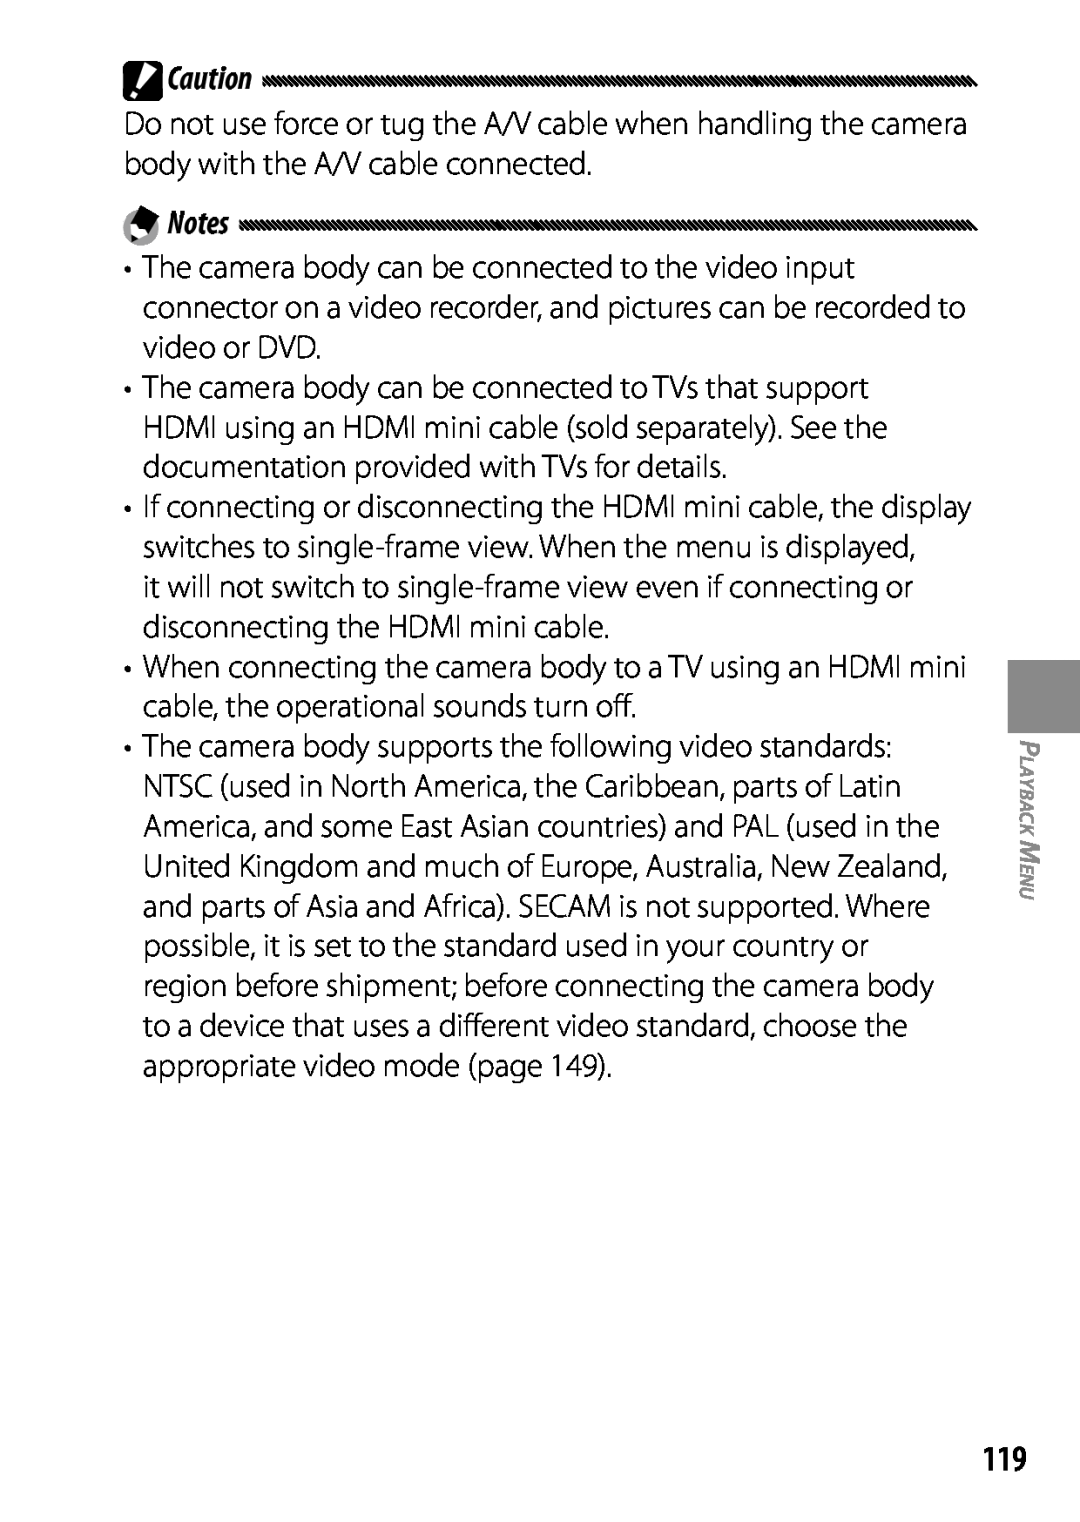 Ricoh 170553, GXR, 170543 Do not use force or tug the A/V cable when handling the camera body with the A/V cable connected 